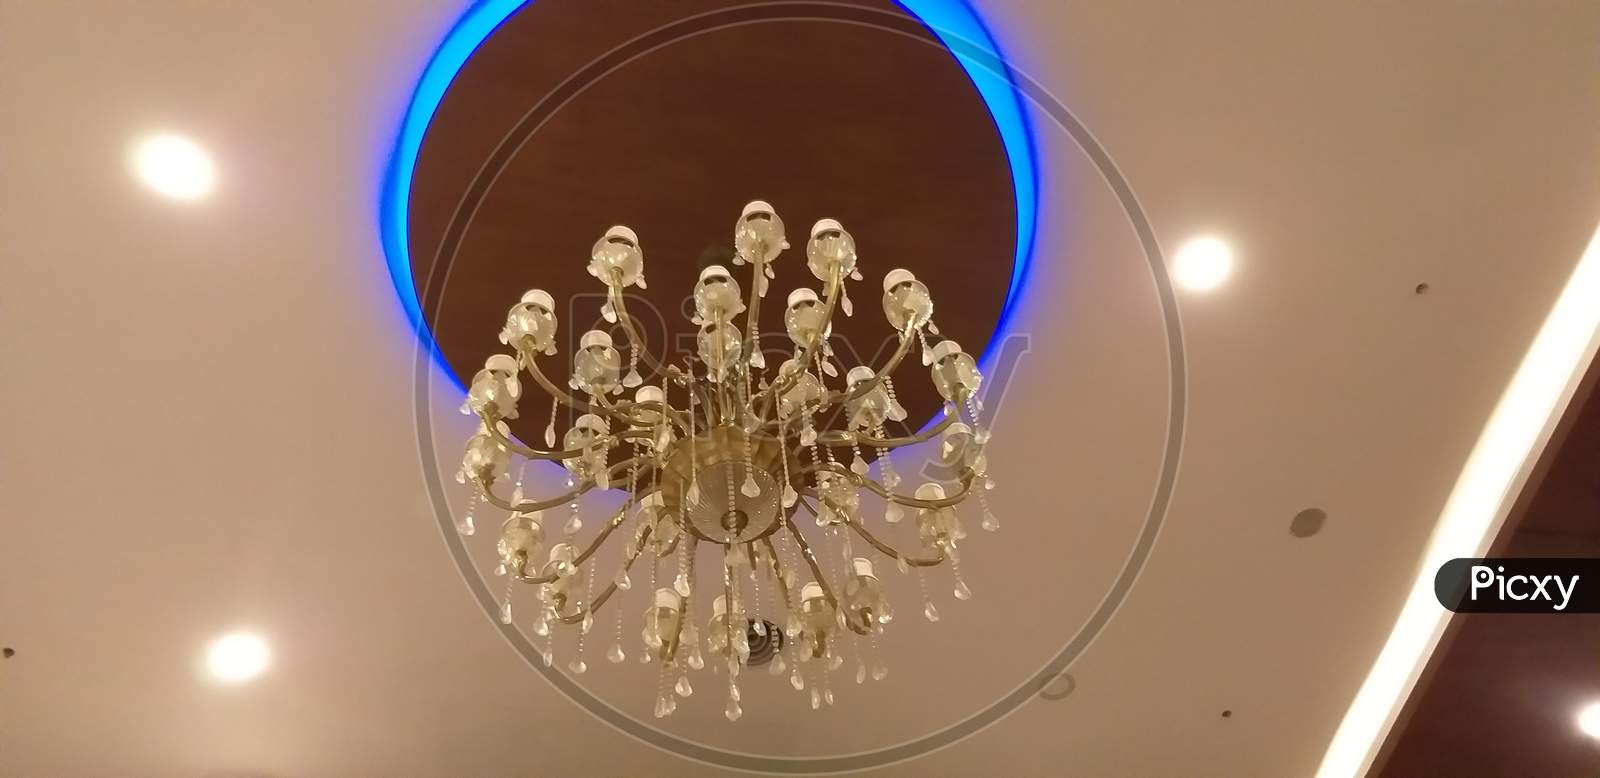 The Gypsum False Ceiling With Circle Wooden Ceiling And Chandelier At The Middle In Very Beautifully Decorated For An Hotel Entrance In Welcoming Way